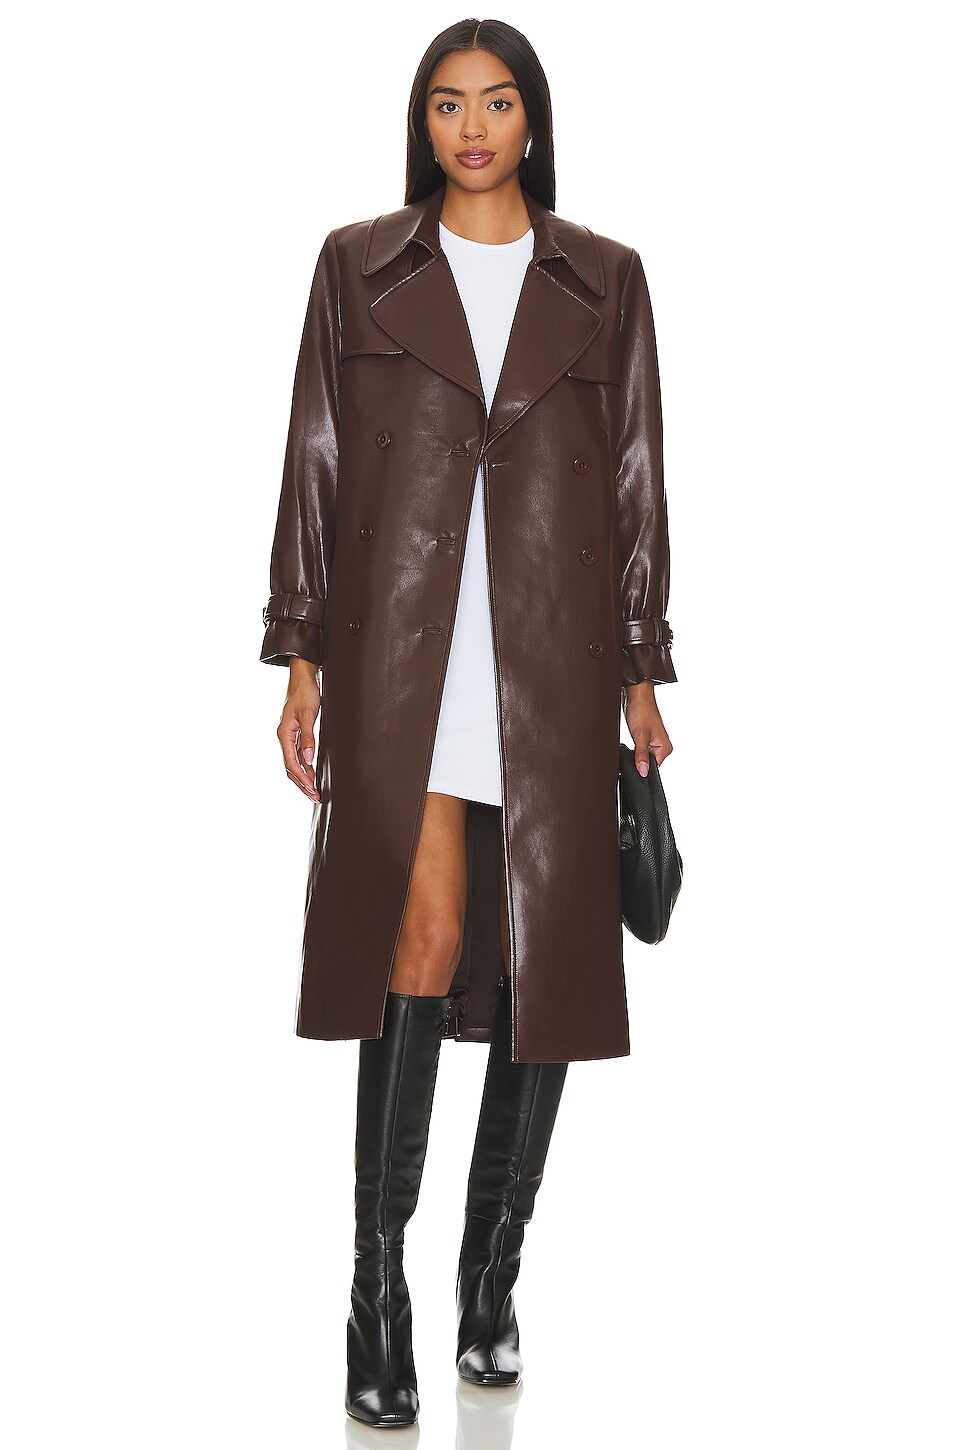 Alice + Olivia Women's Elicia Vegan Leather Trench Coat - Toffee - Size Large